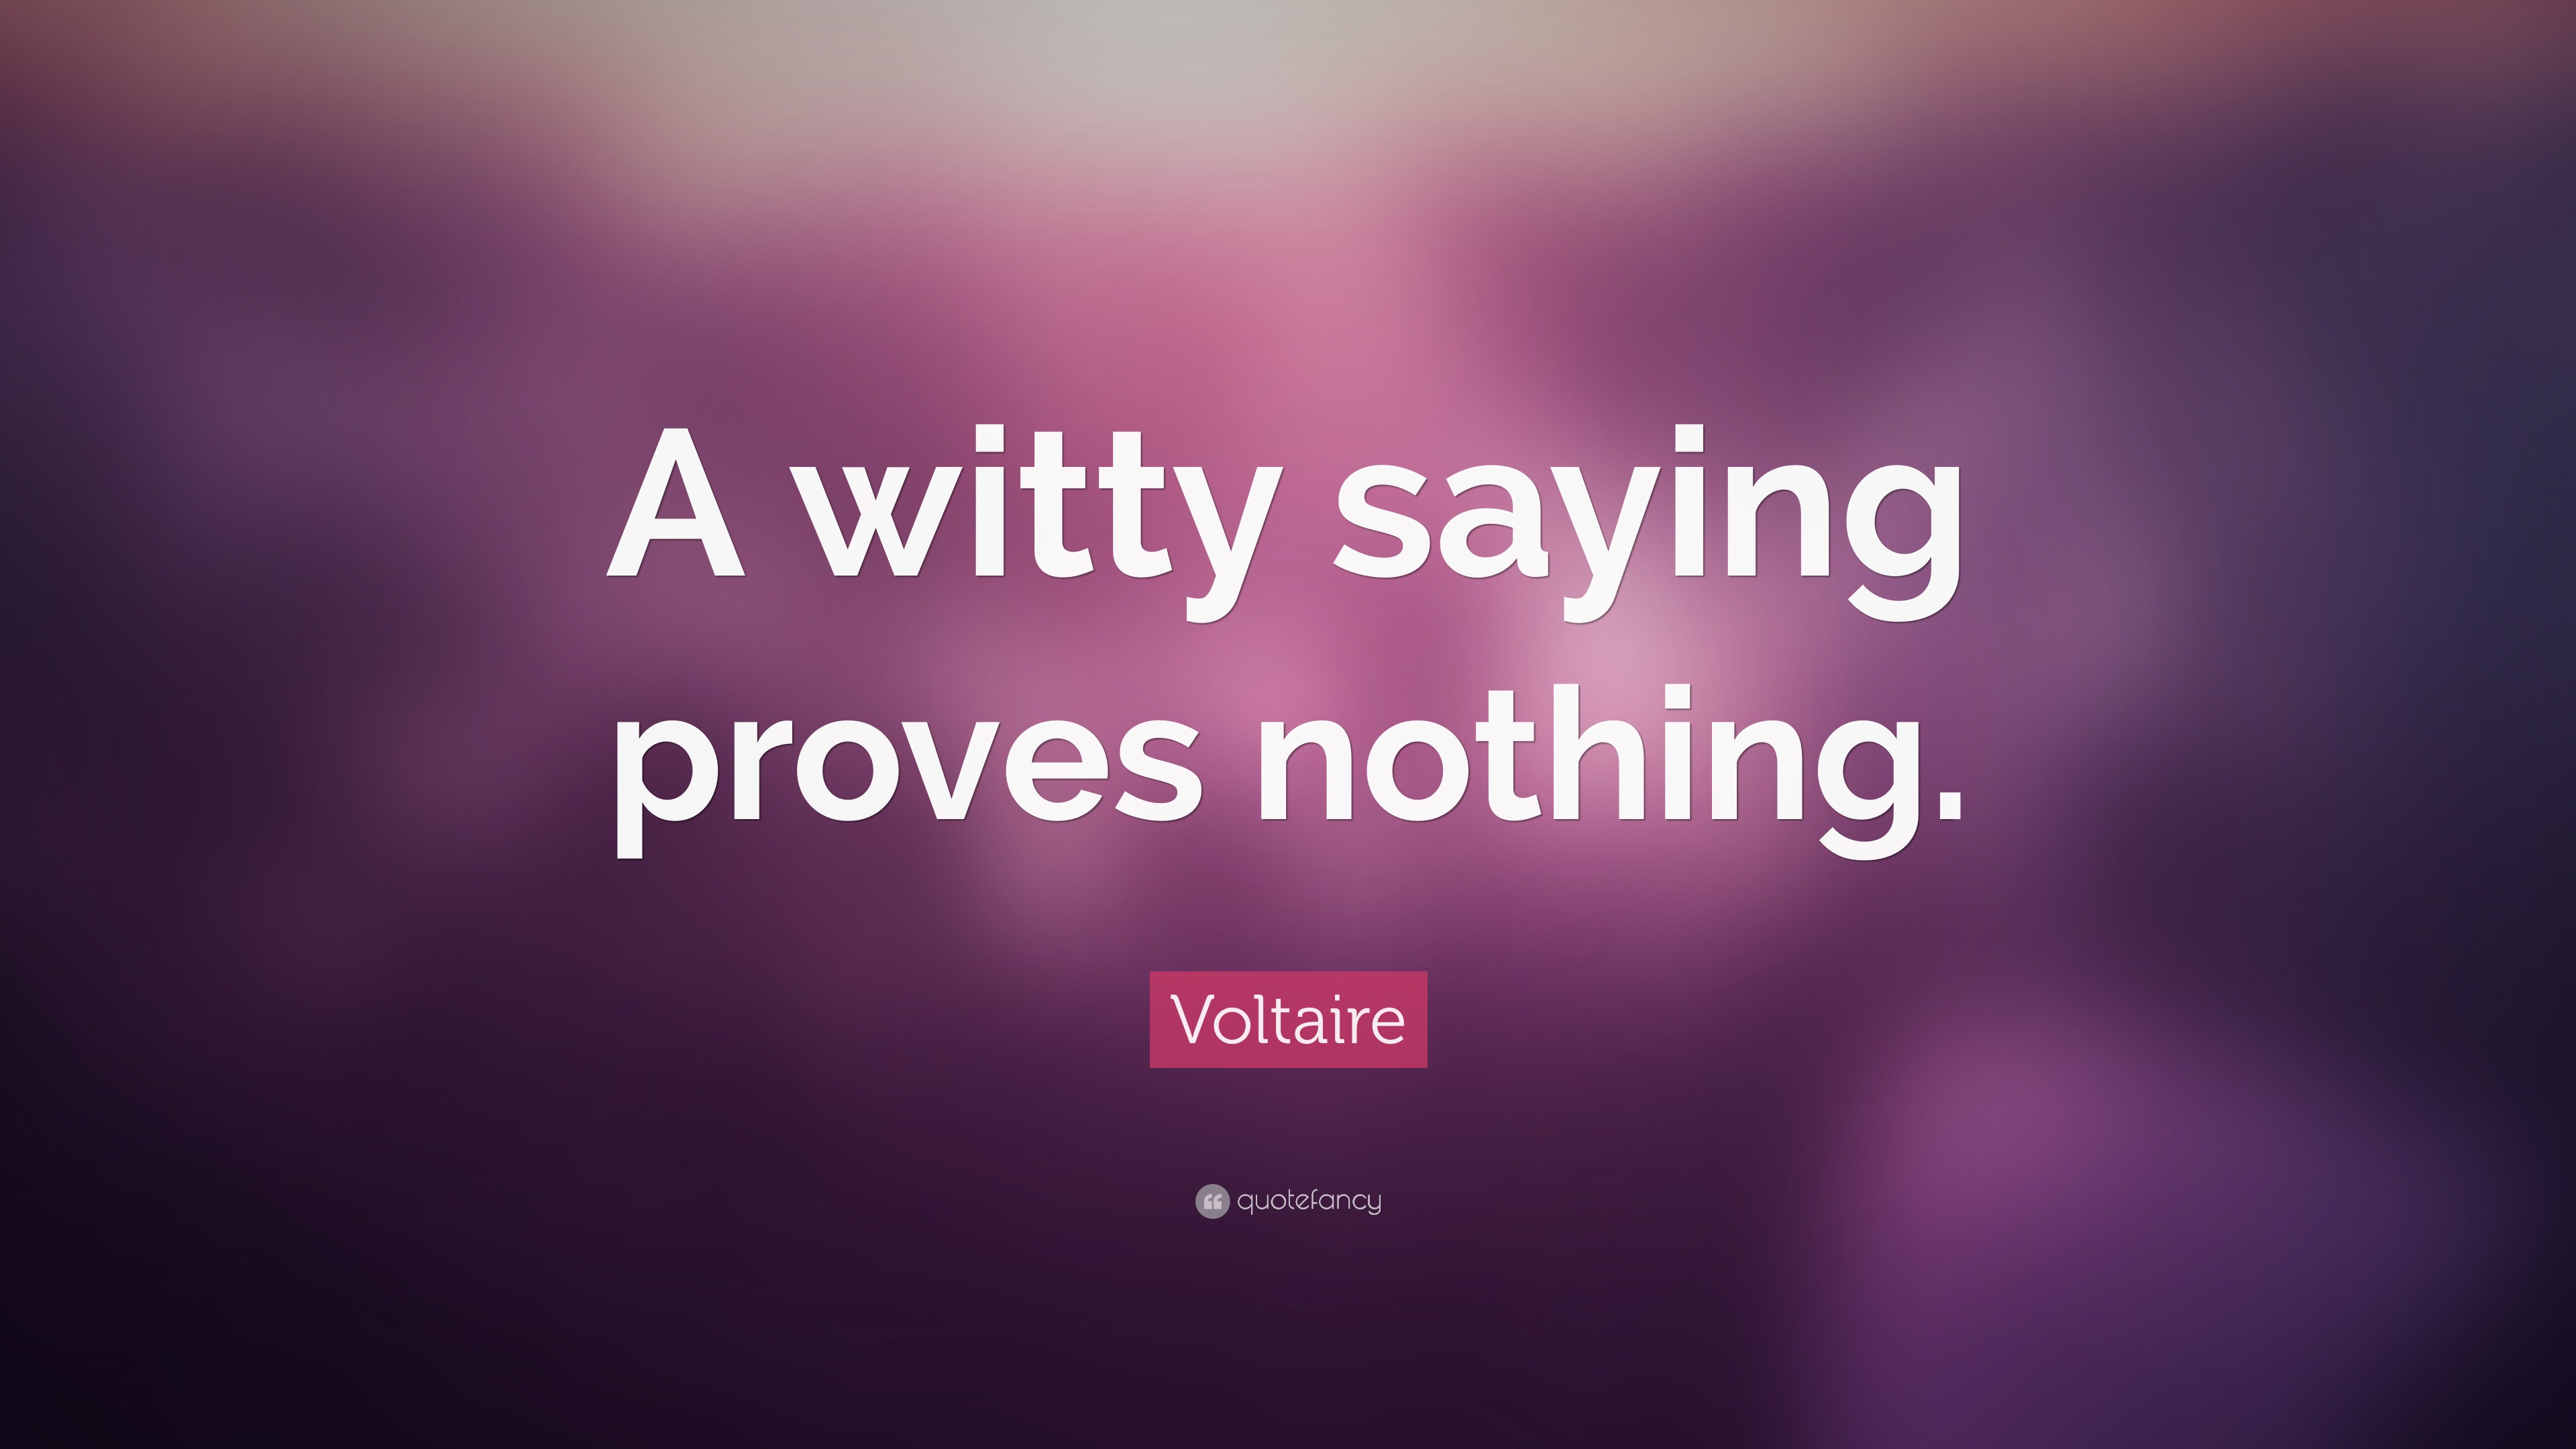 Voltaire Quote: “A witty saying proves nothing.”